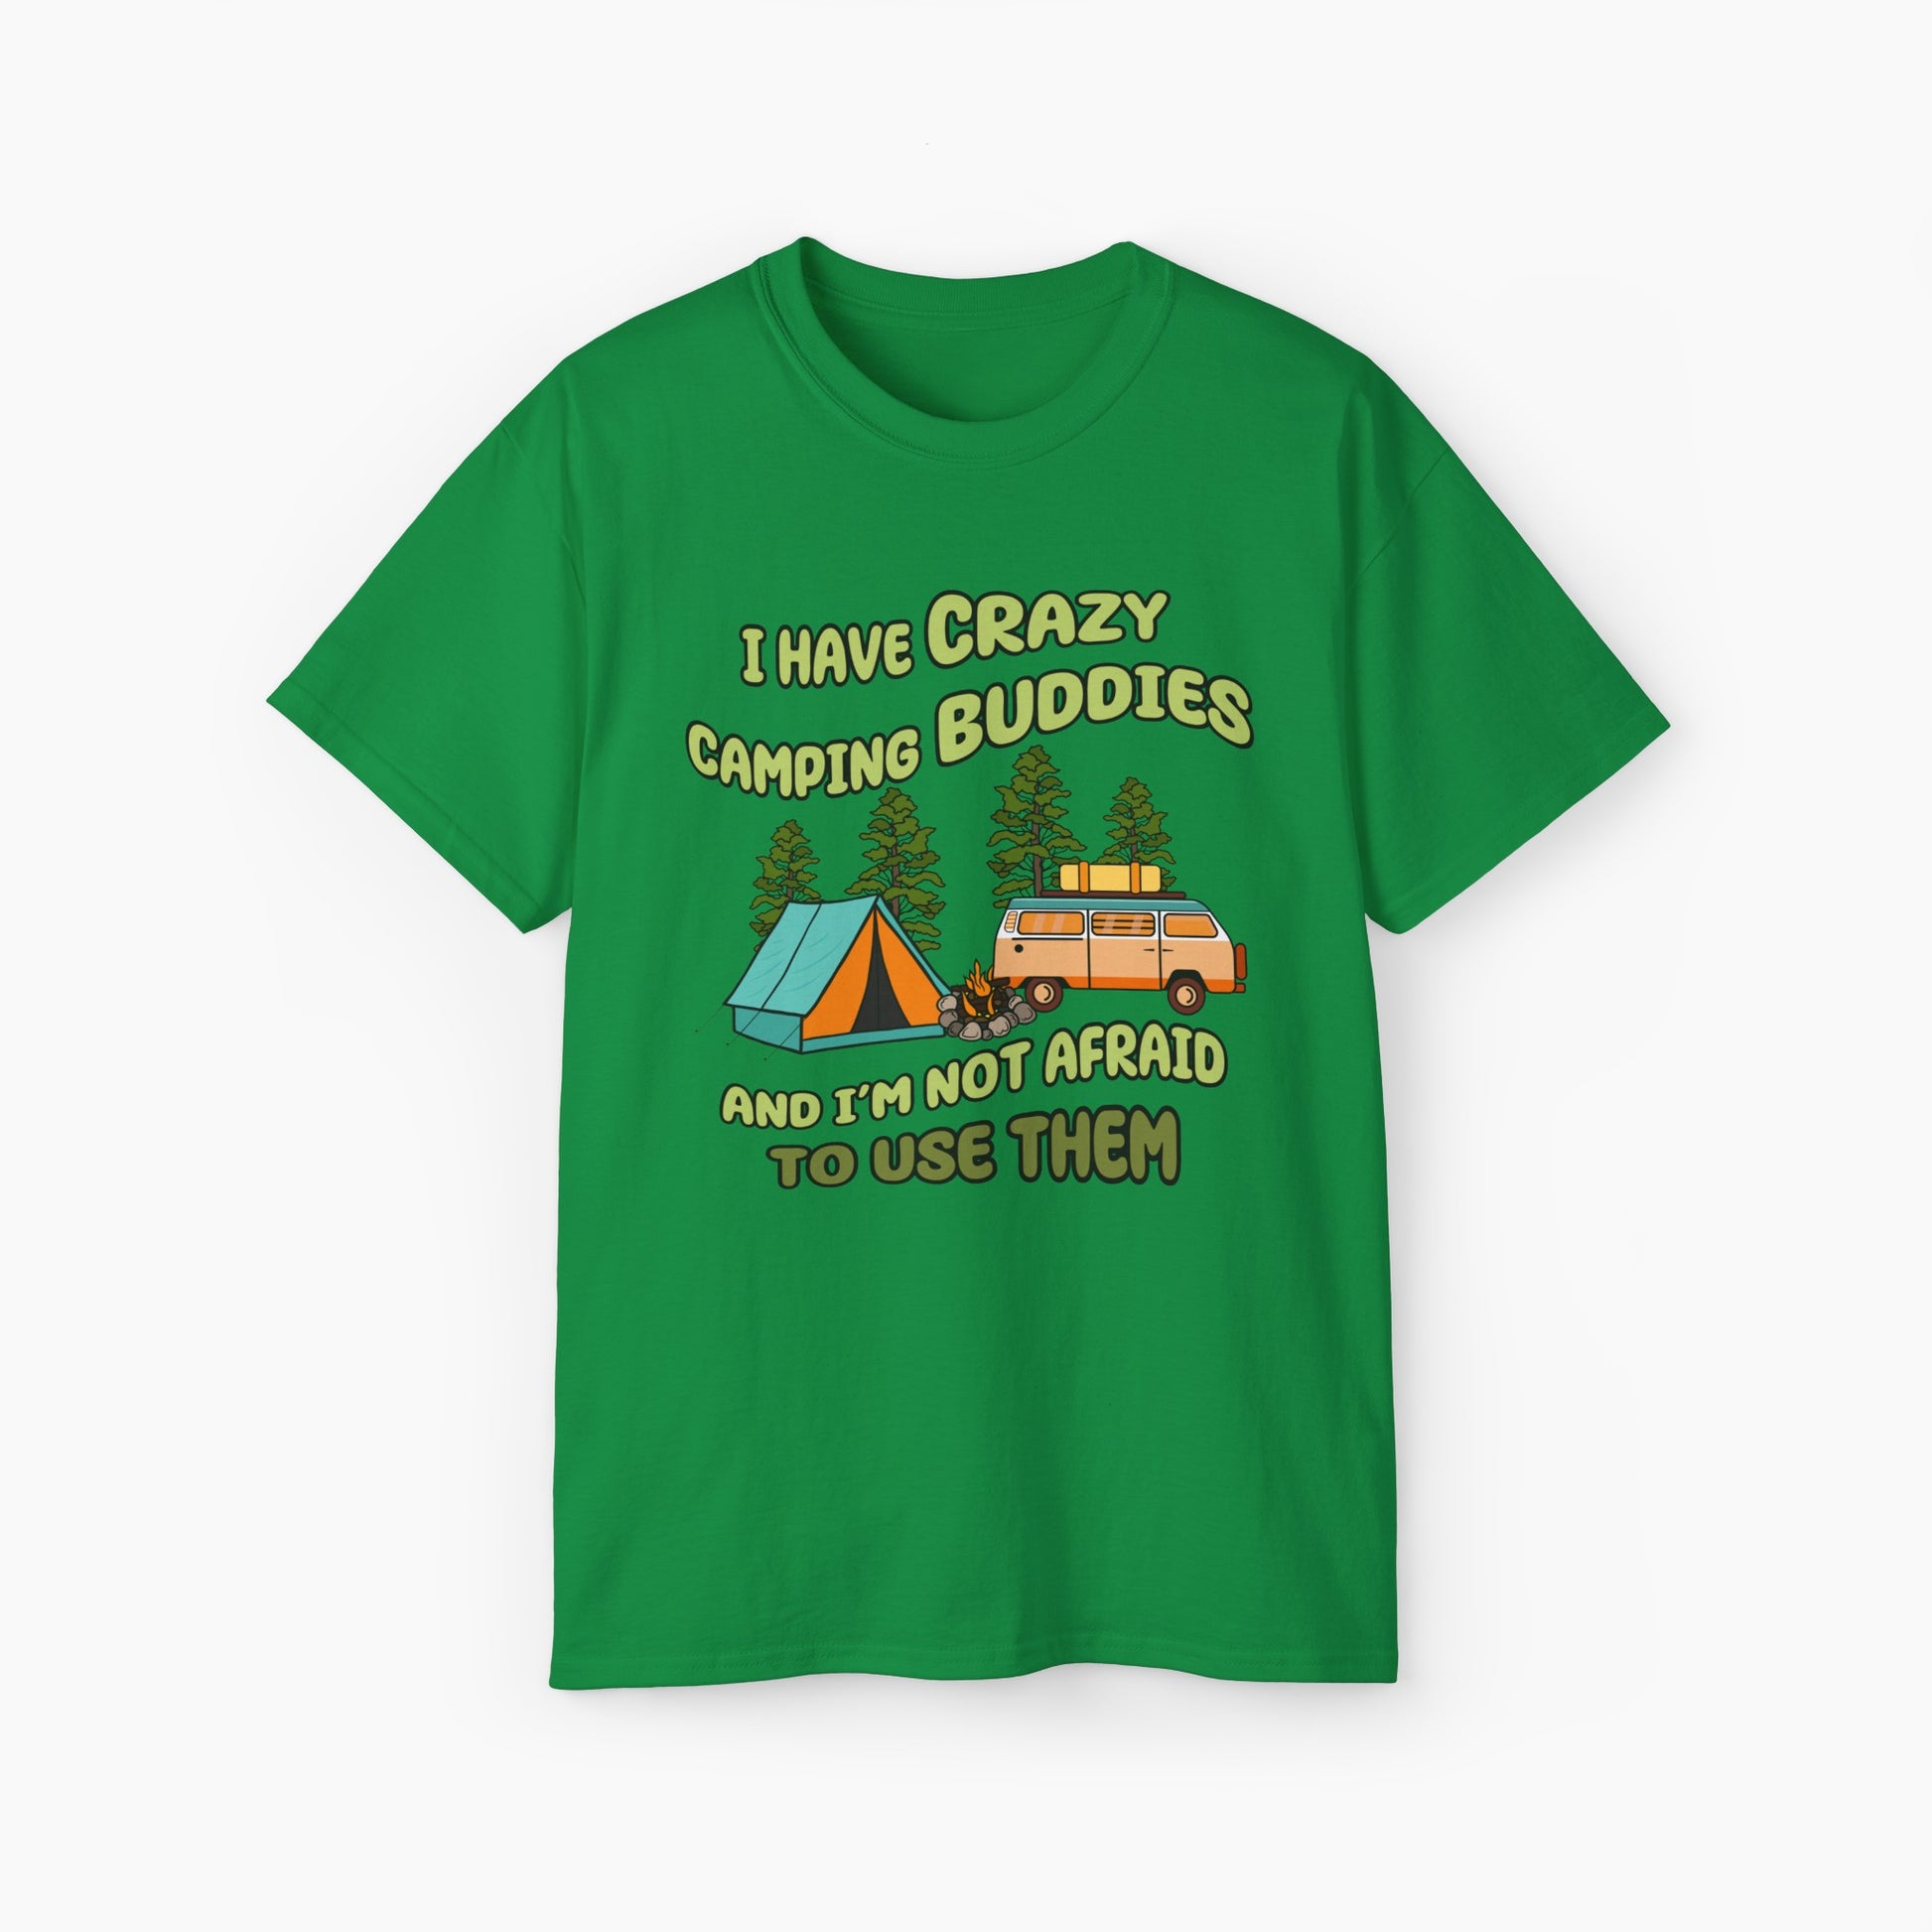 Green t-shirt with the text 'I have crazy camping buddies and I am not afraid to use them,' featuring a camping van, campfire, trees, and a tent."